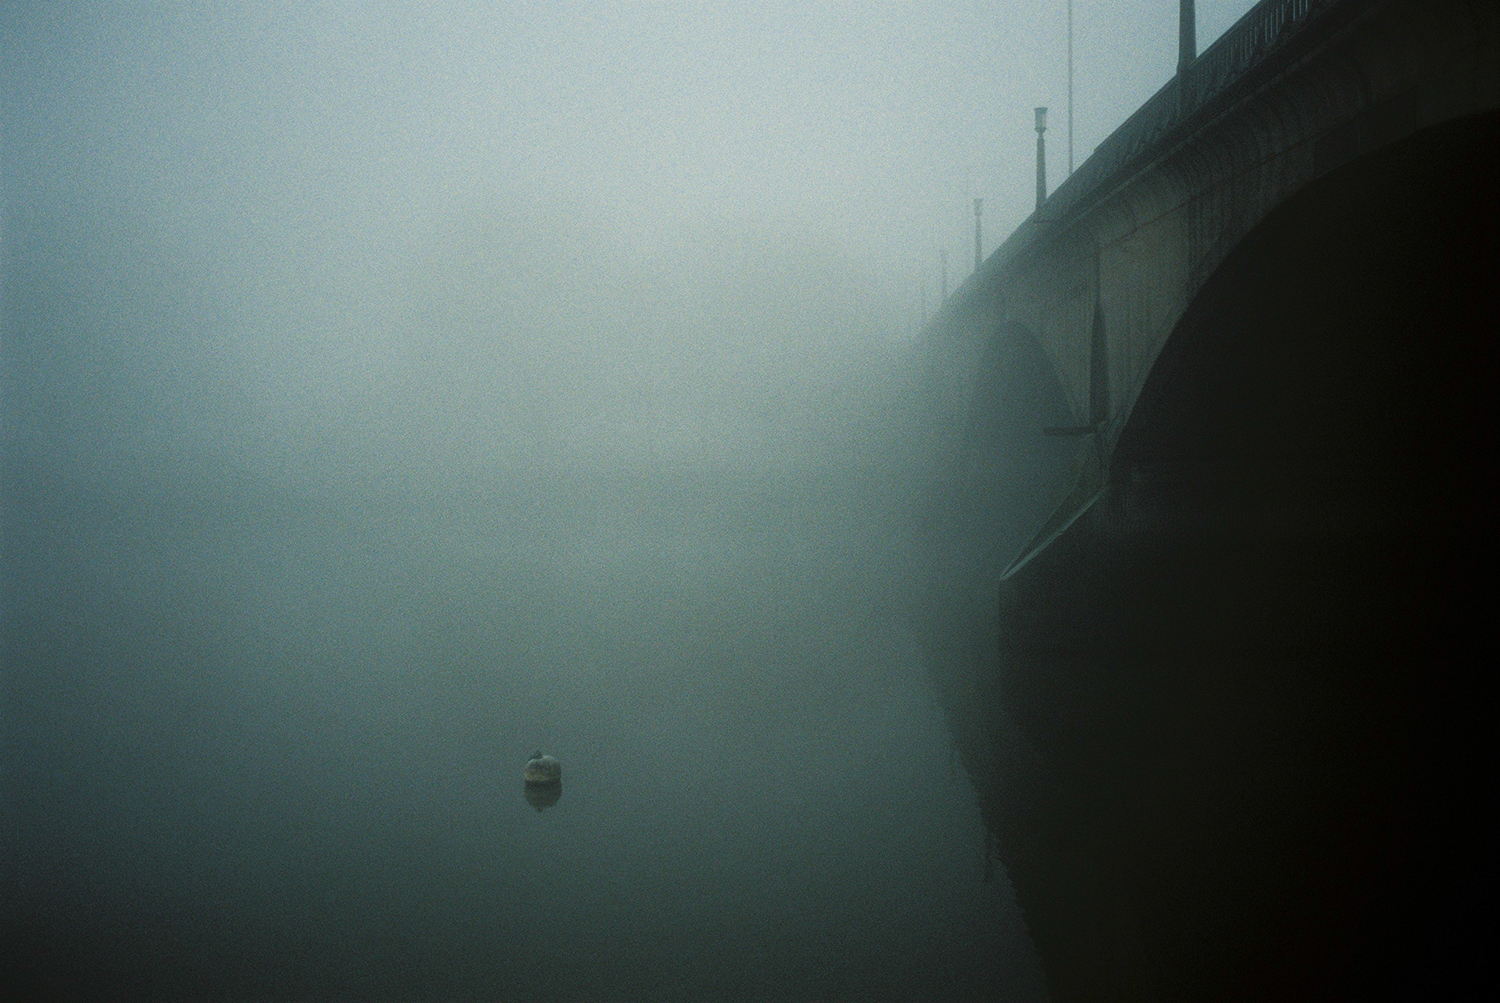  London's Richmond photographed on foggy morning. Taken with a Olympus MjuII camera and Fuji 400H film. By Dmitry Serostanov. 